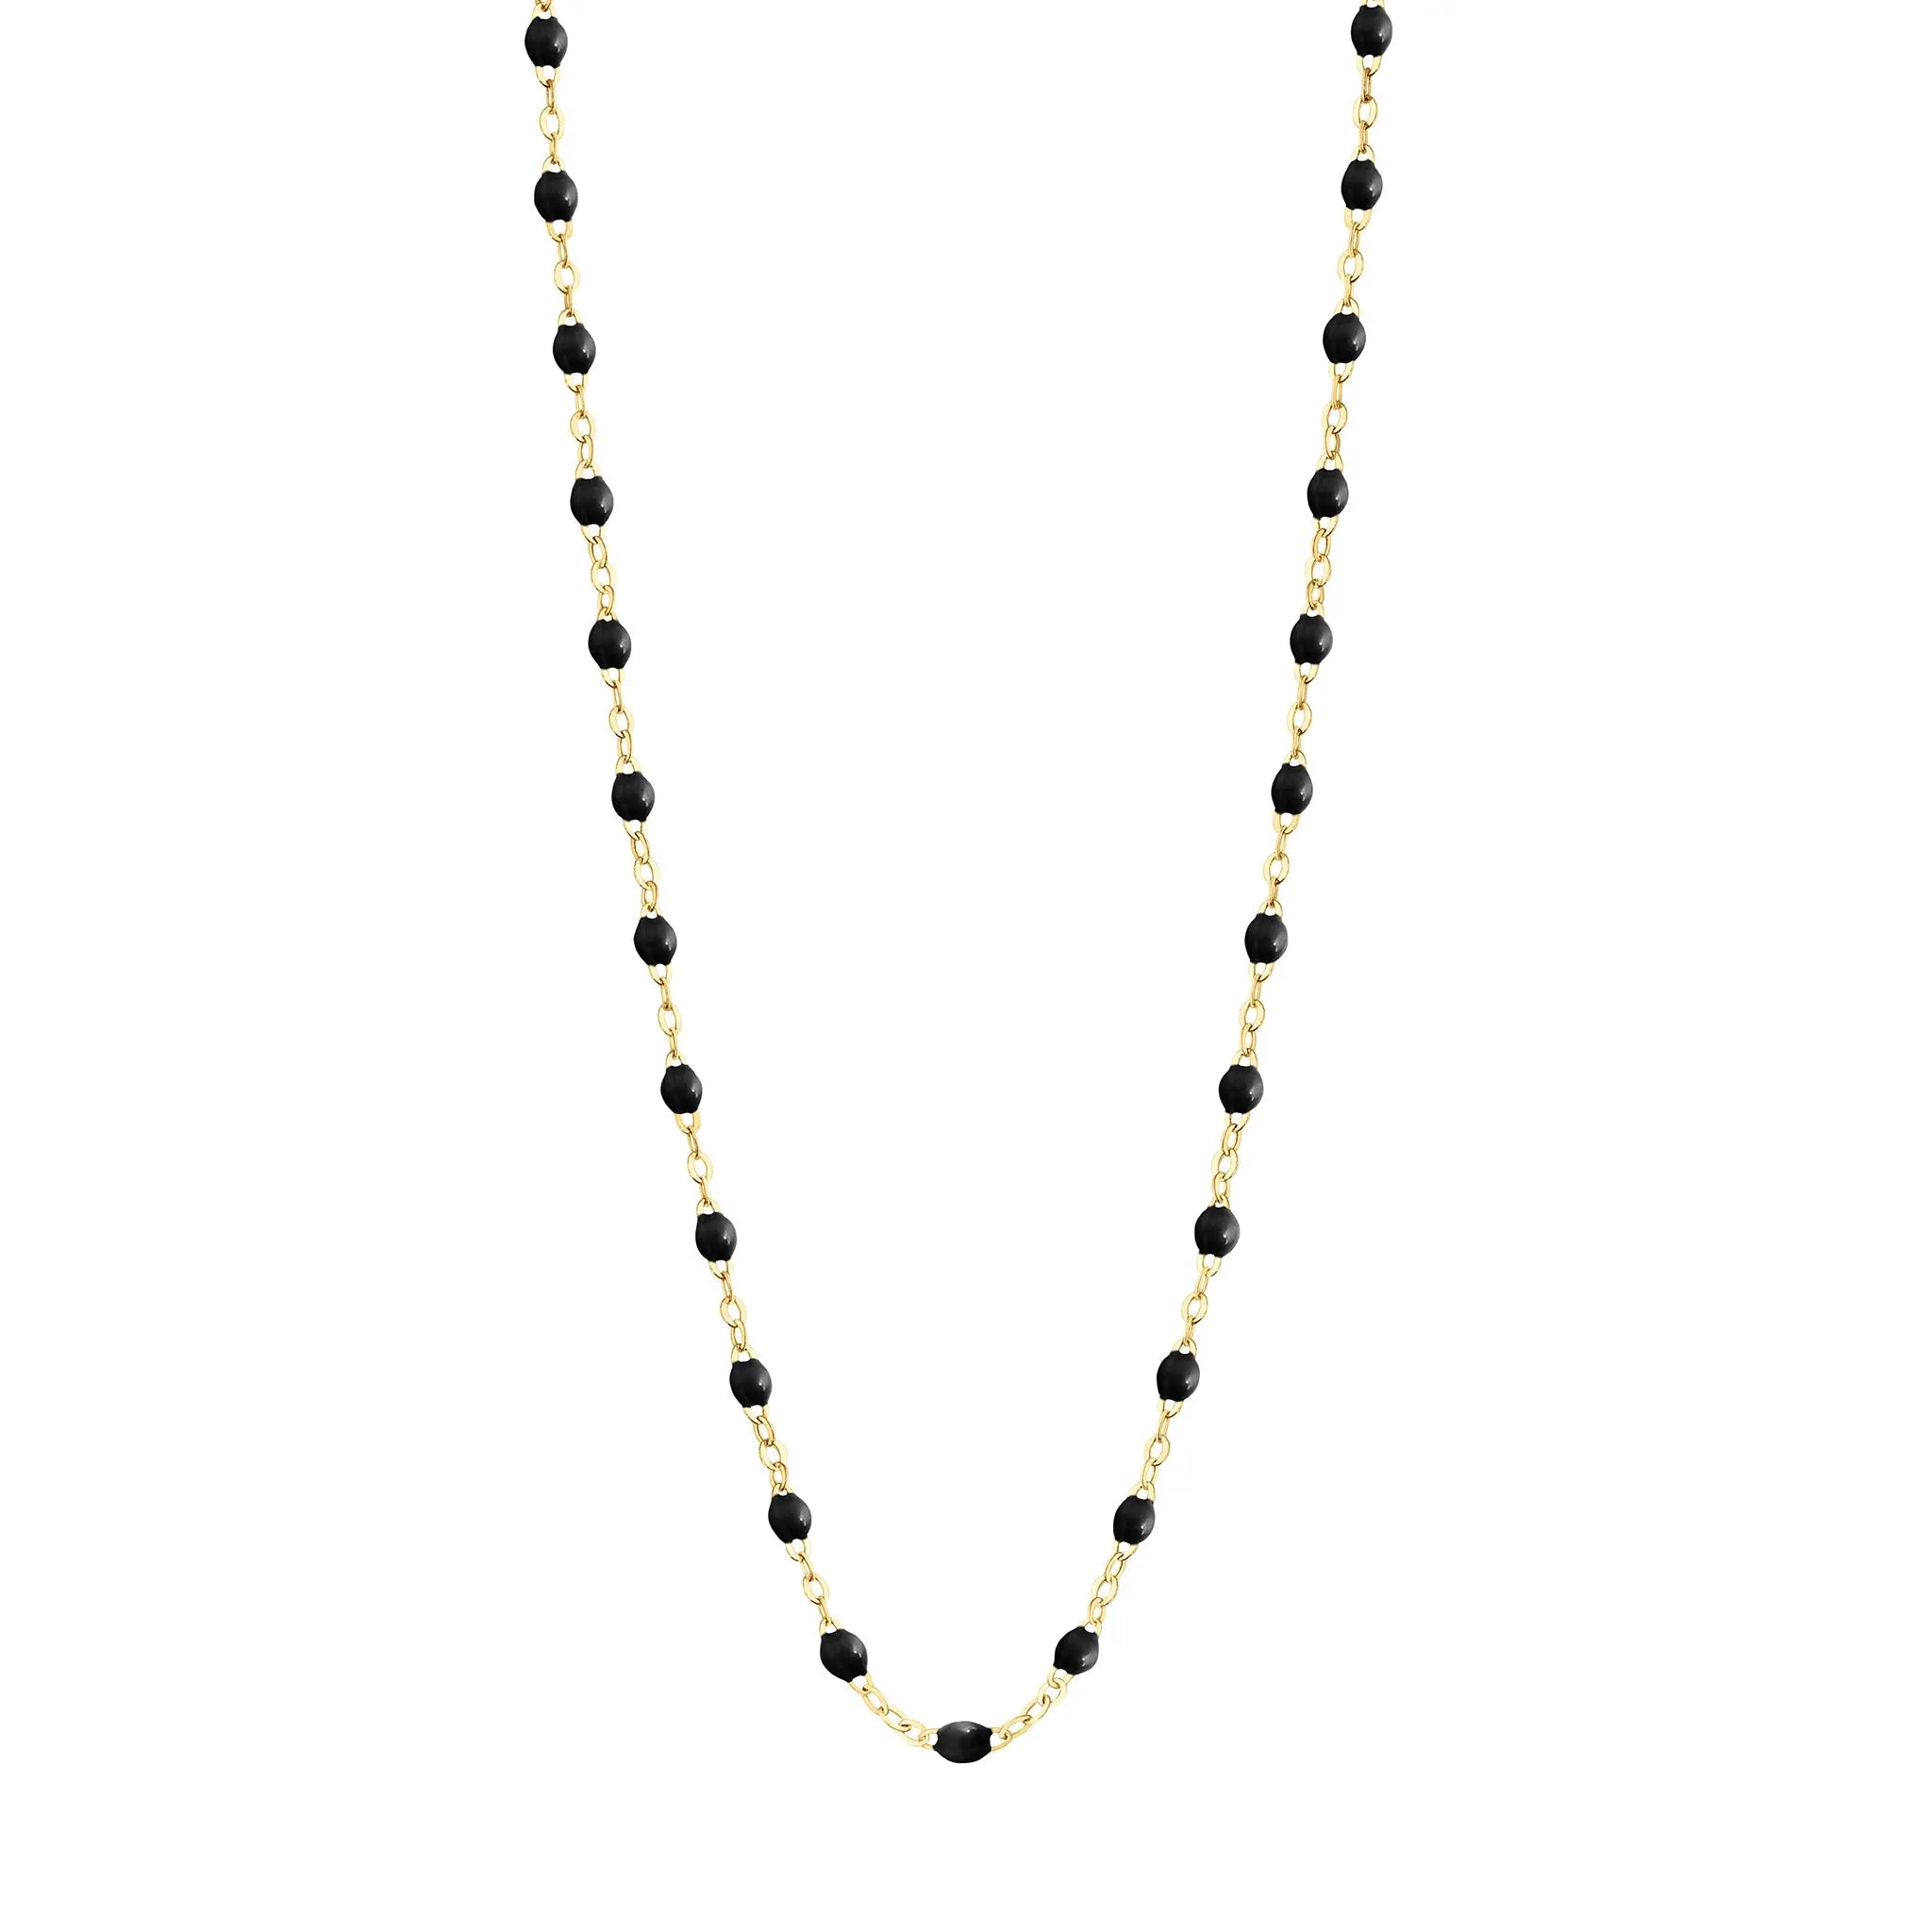 Stack you necklace layers with this versatile beaded chain! The Classic Gigi Necklace by gigi CLOZEAU features 18 carat yellow gold, and striking Black resin jewels for an everyday effortless appearance. Handcrafted in 18k yellow gold. The beads measure 1.50mm in diameter and is finished with a spring ring clasp. The length is 16.5 inches.